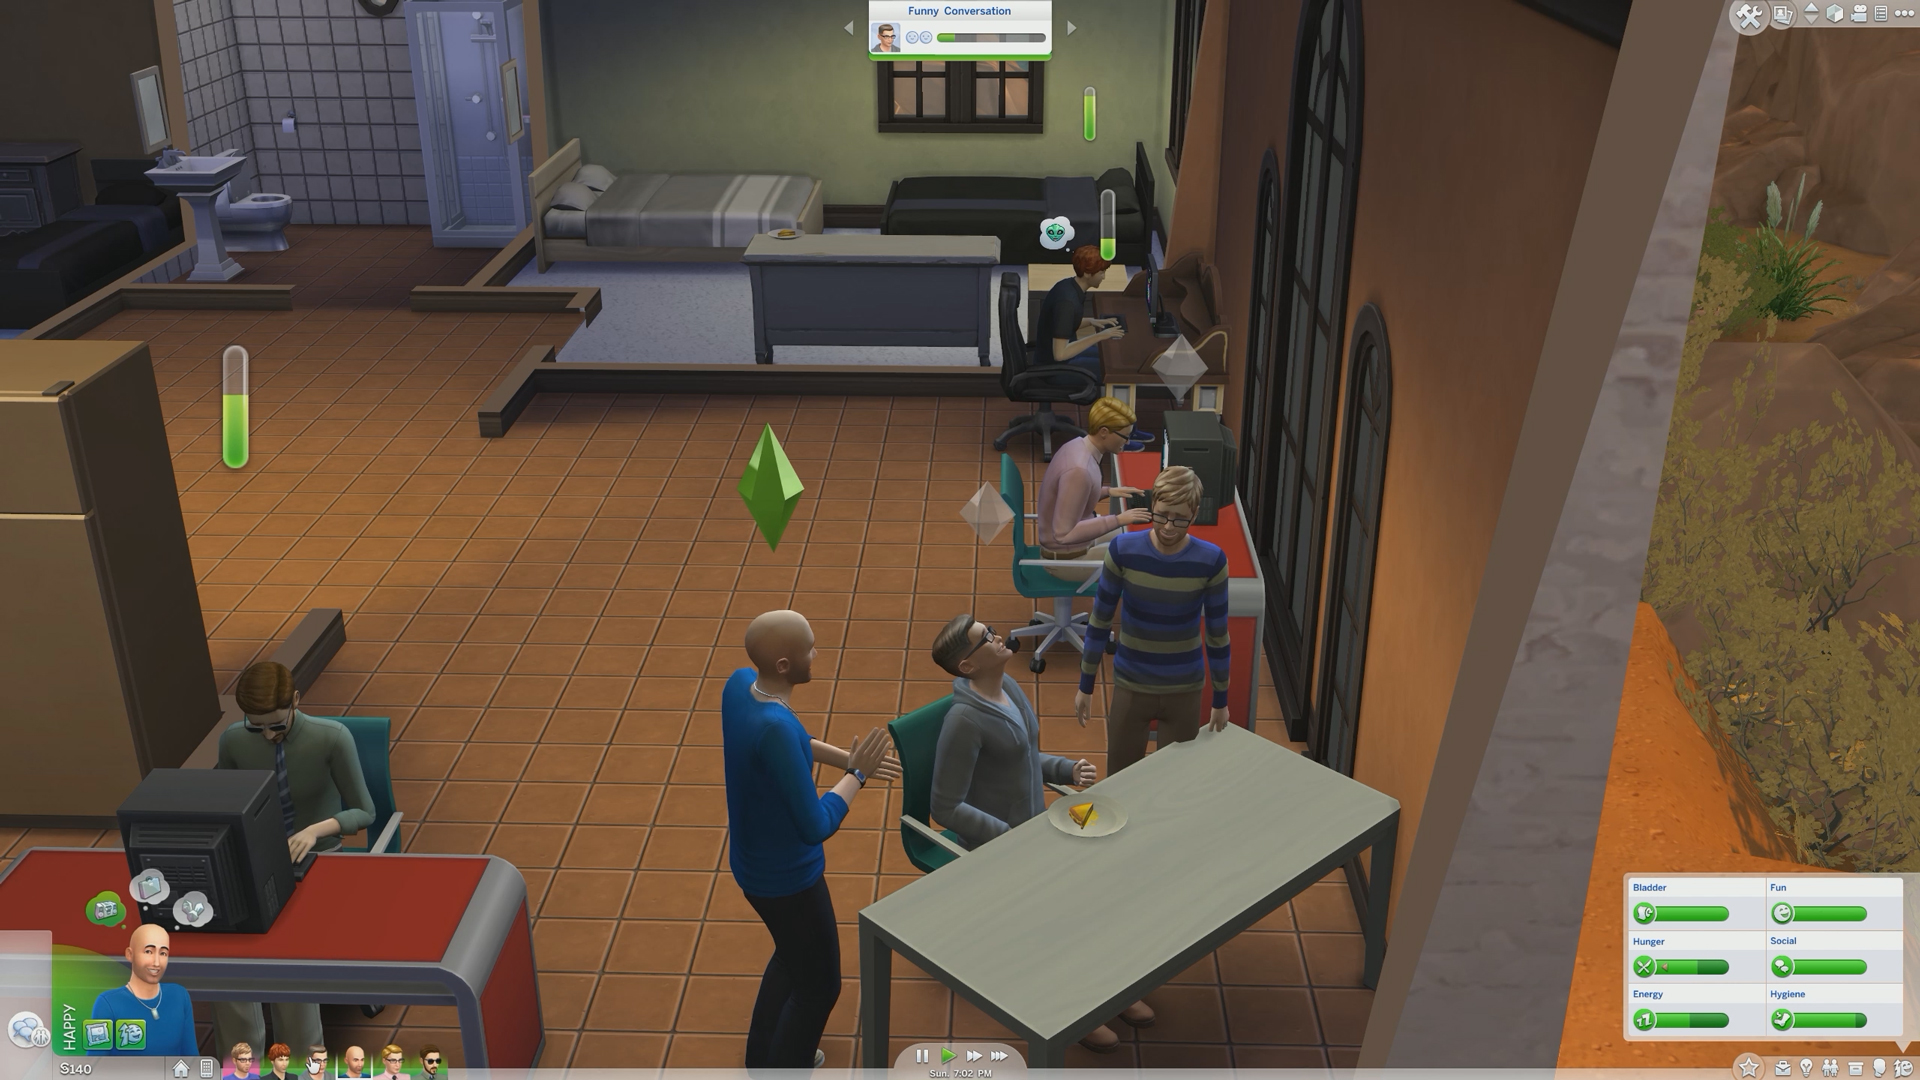 The Sims 4 gameplay video — the PC Gamer team moves in together, pees a